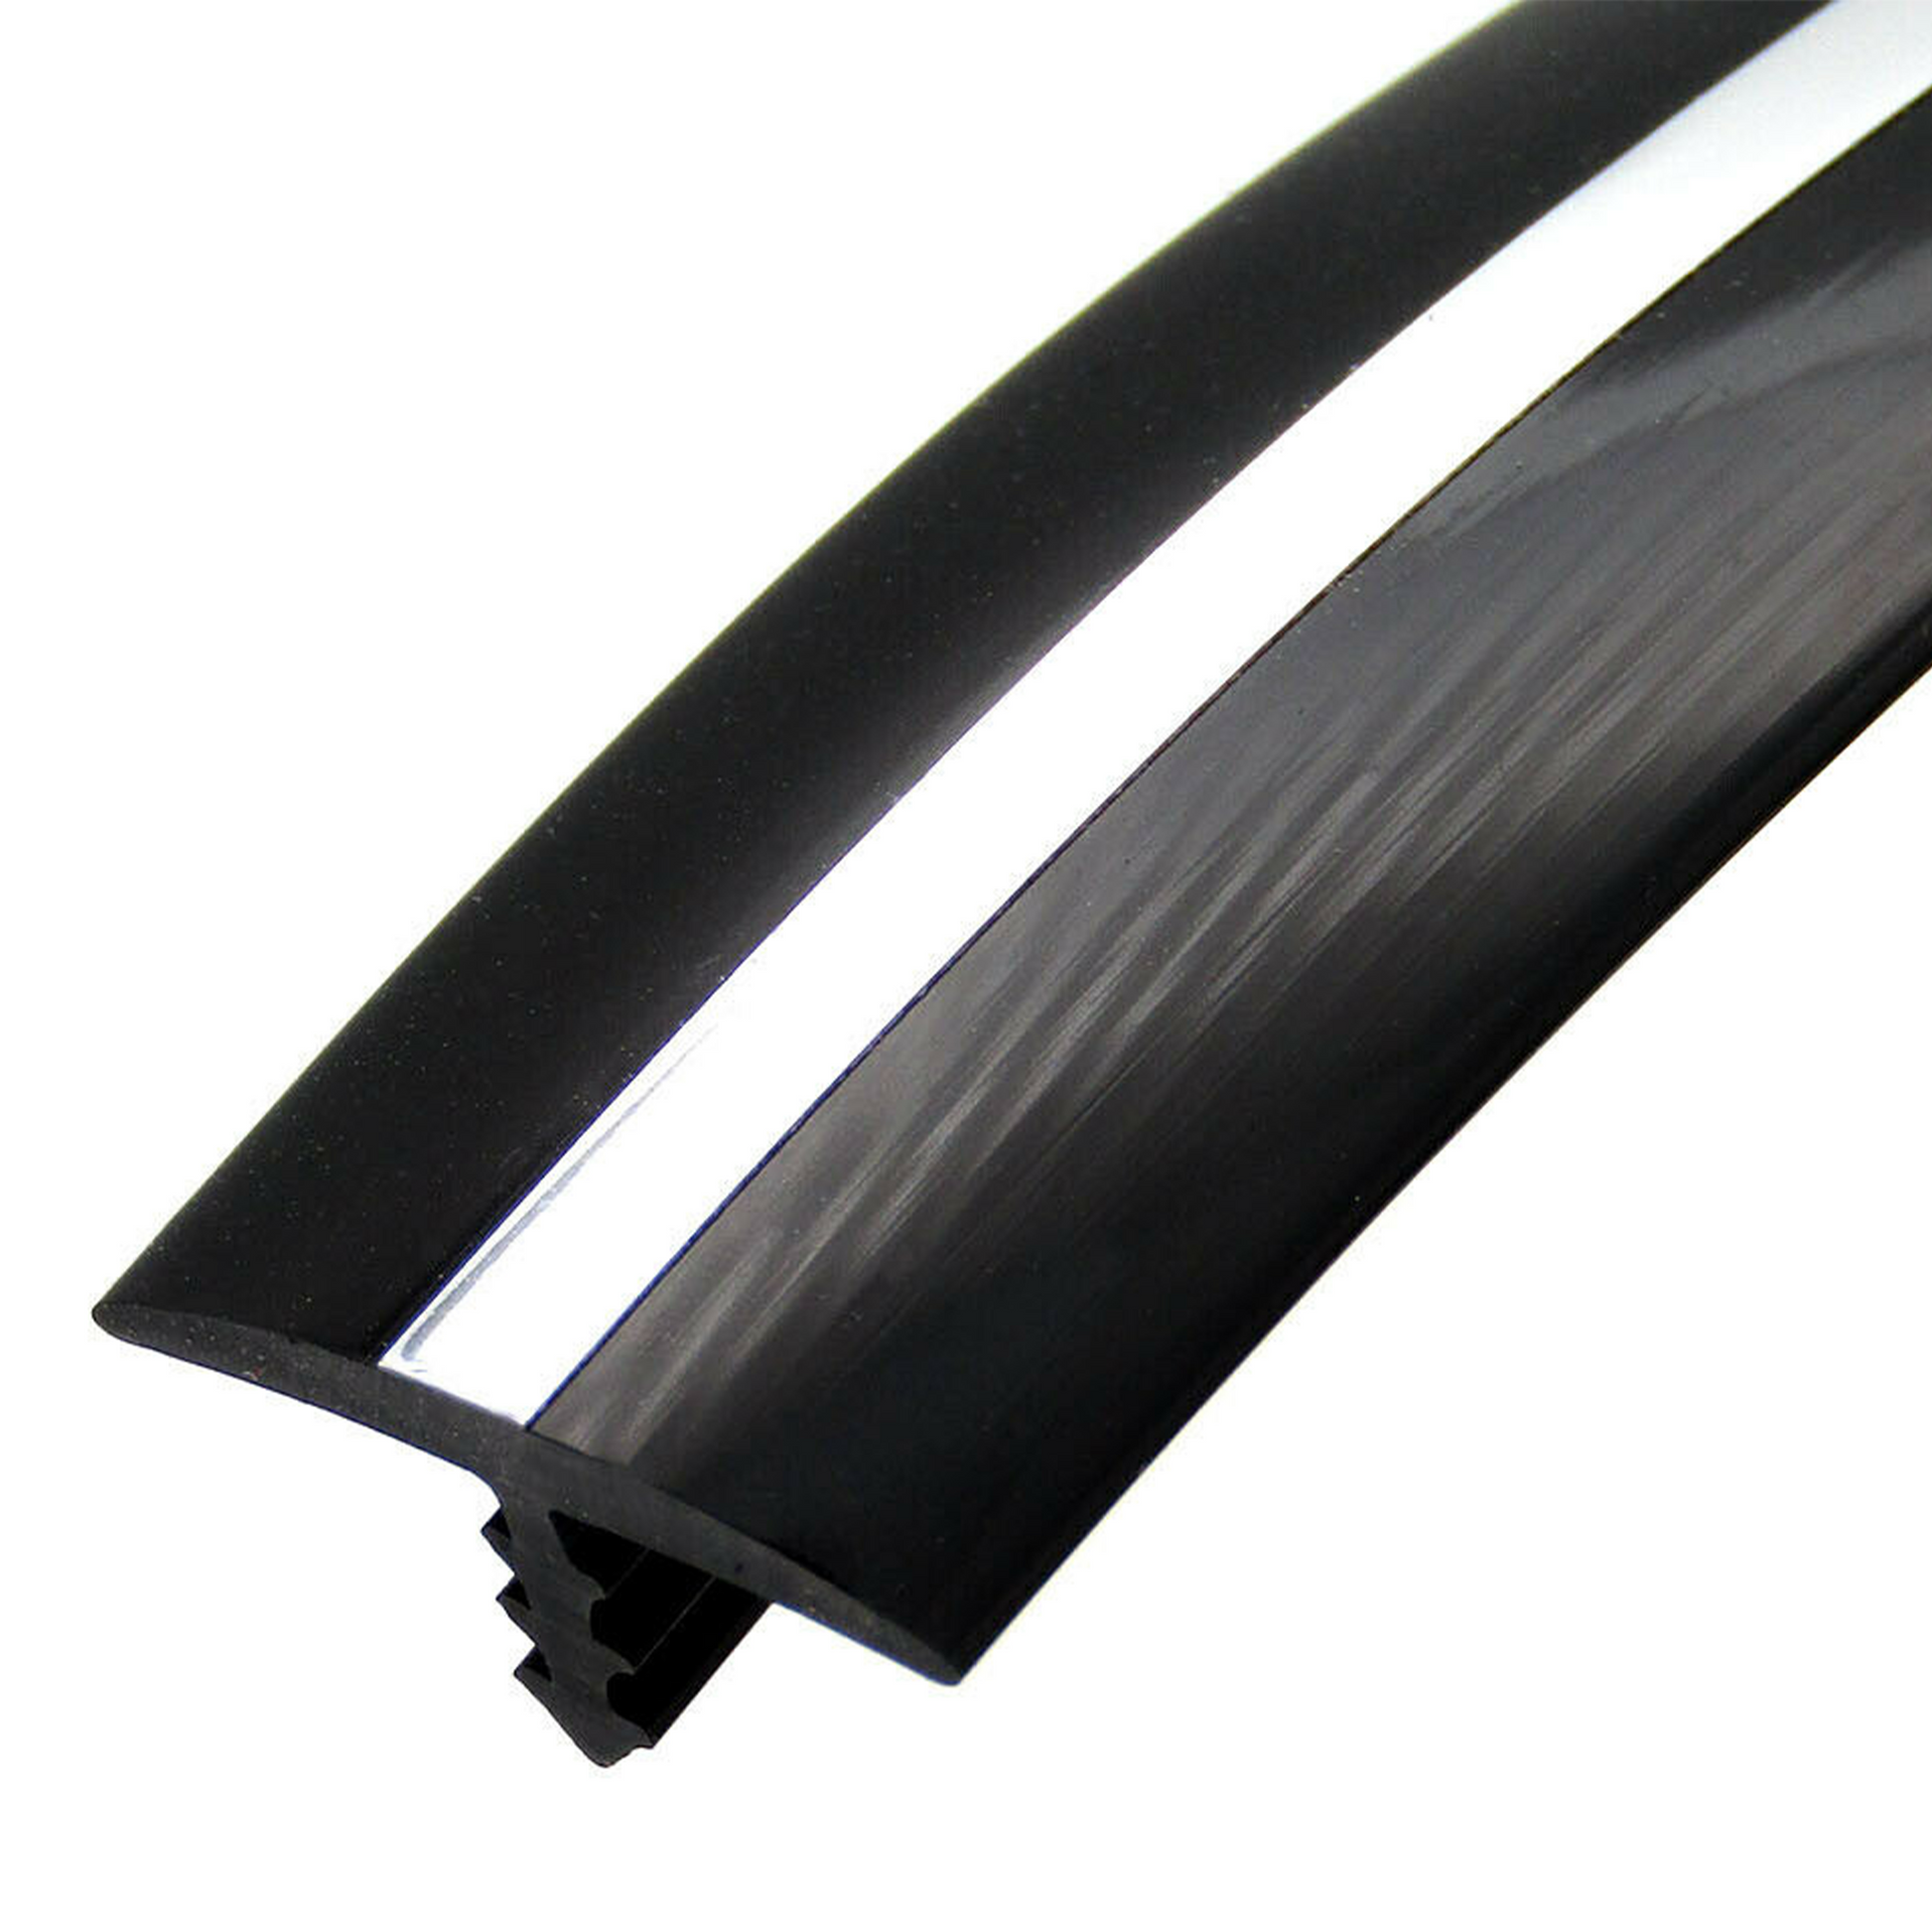 This black, 1’L x ¾”W, T-Molding features a metallic center strip and comes as one piece based on quantity ordered.  1’L x 3/4"W. Sold by Miele Manufacturing.